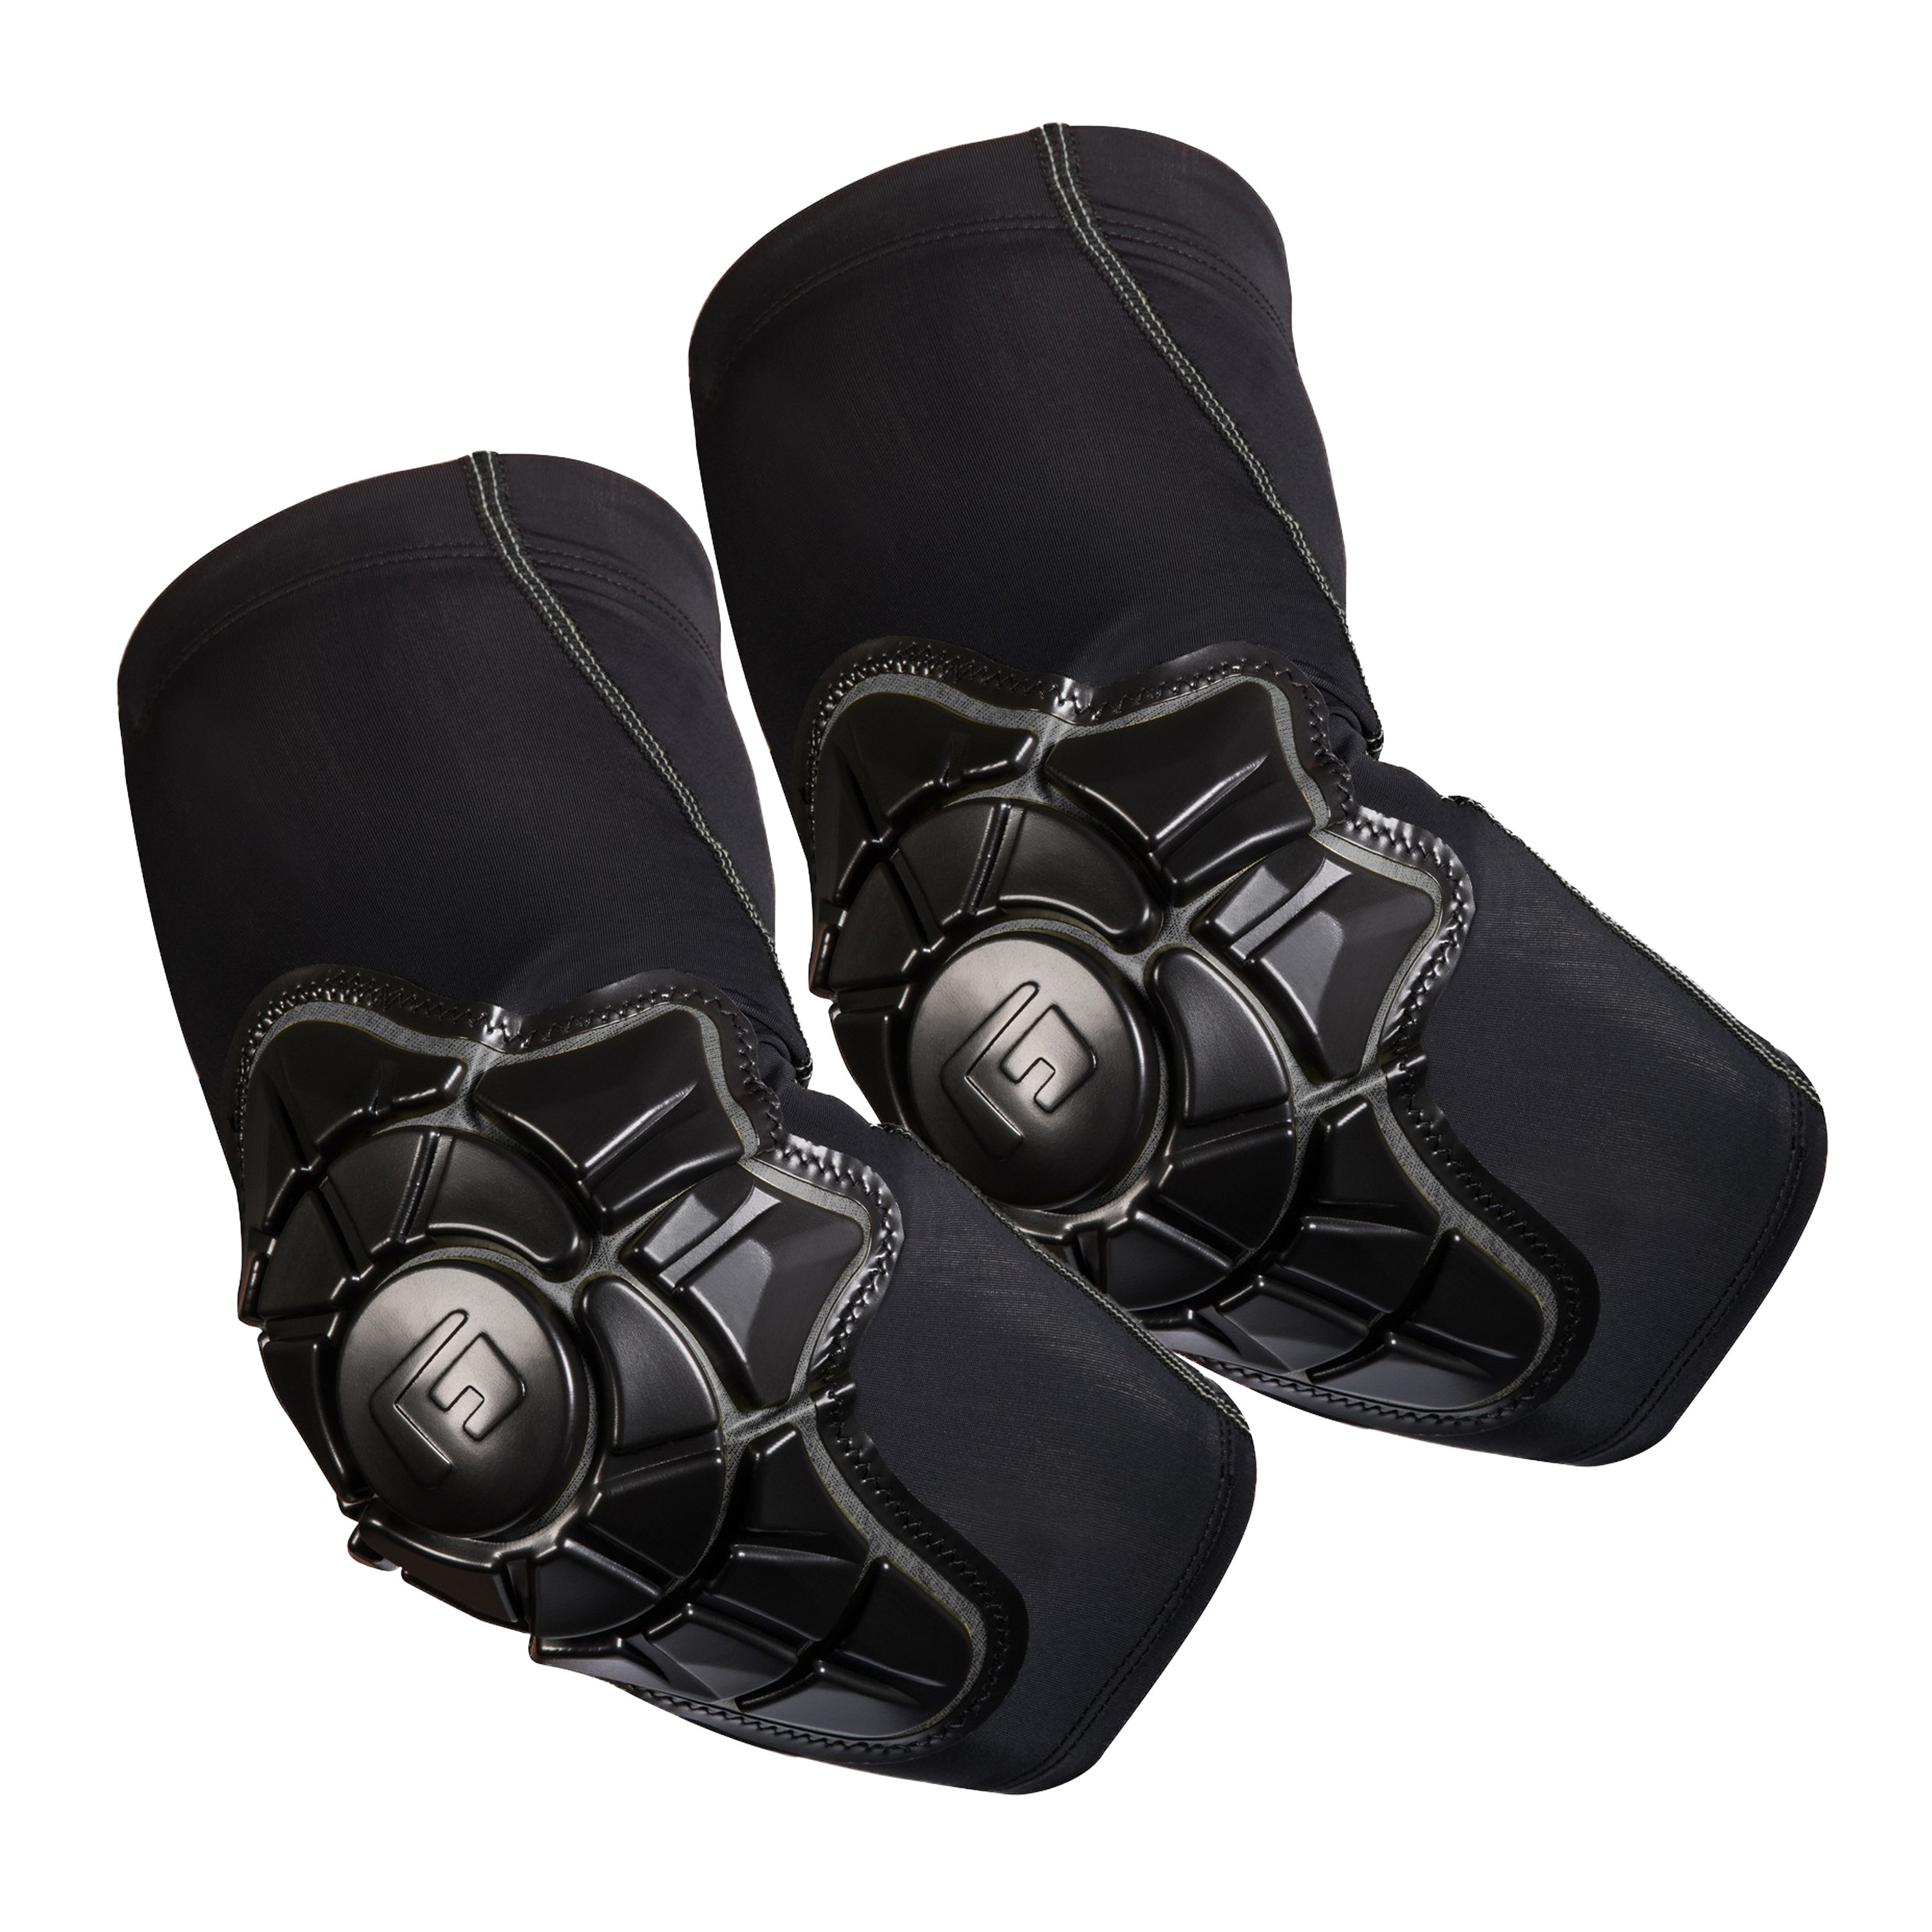 purchase-the-g-form-pro-x-elbow-pads-by-asmc